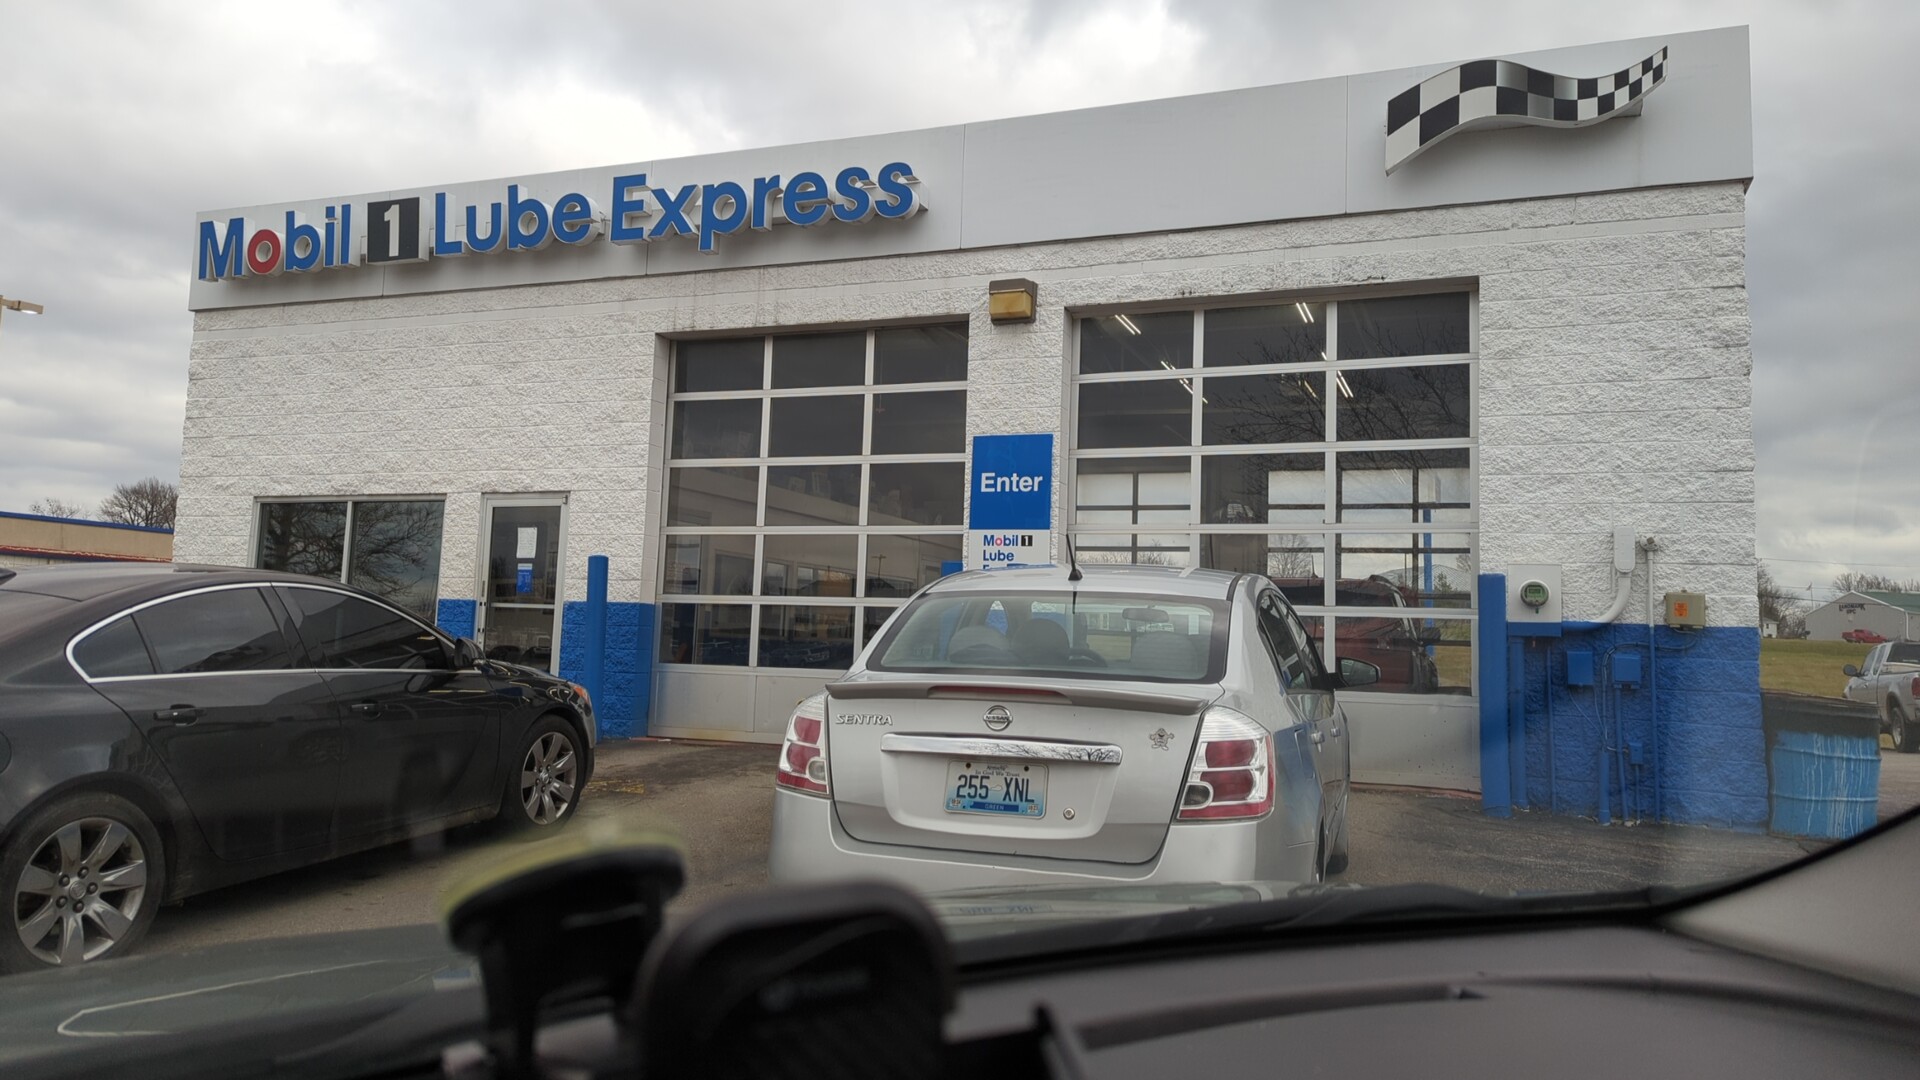 Mobile 1 Lube Express